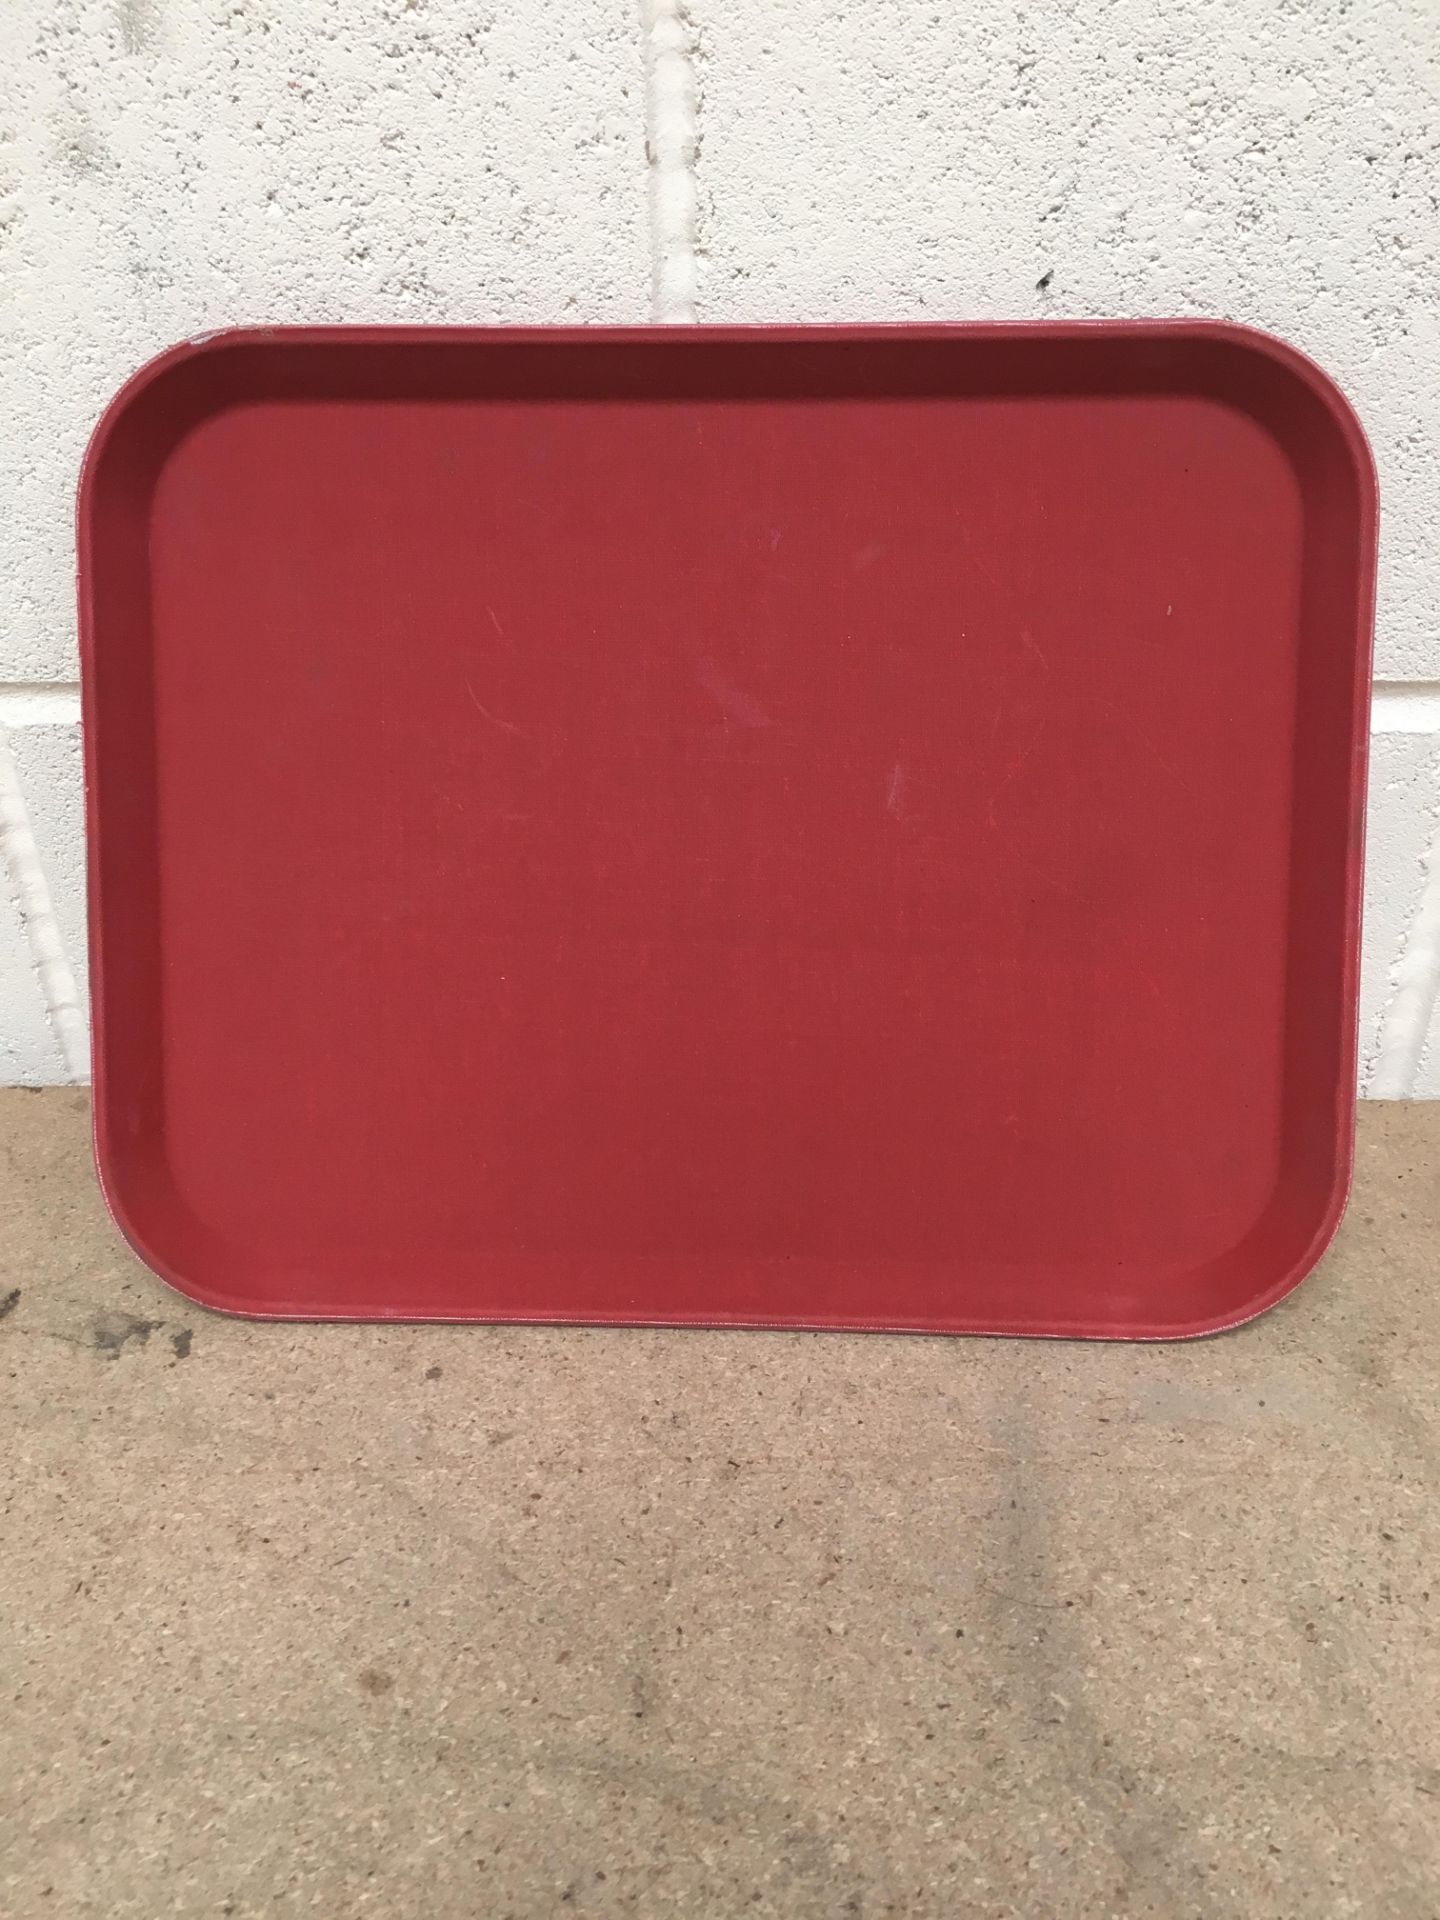 NEW 24 RED Non Slip Trays 14" x 10" in 2 Boxes